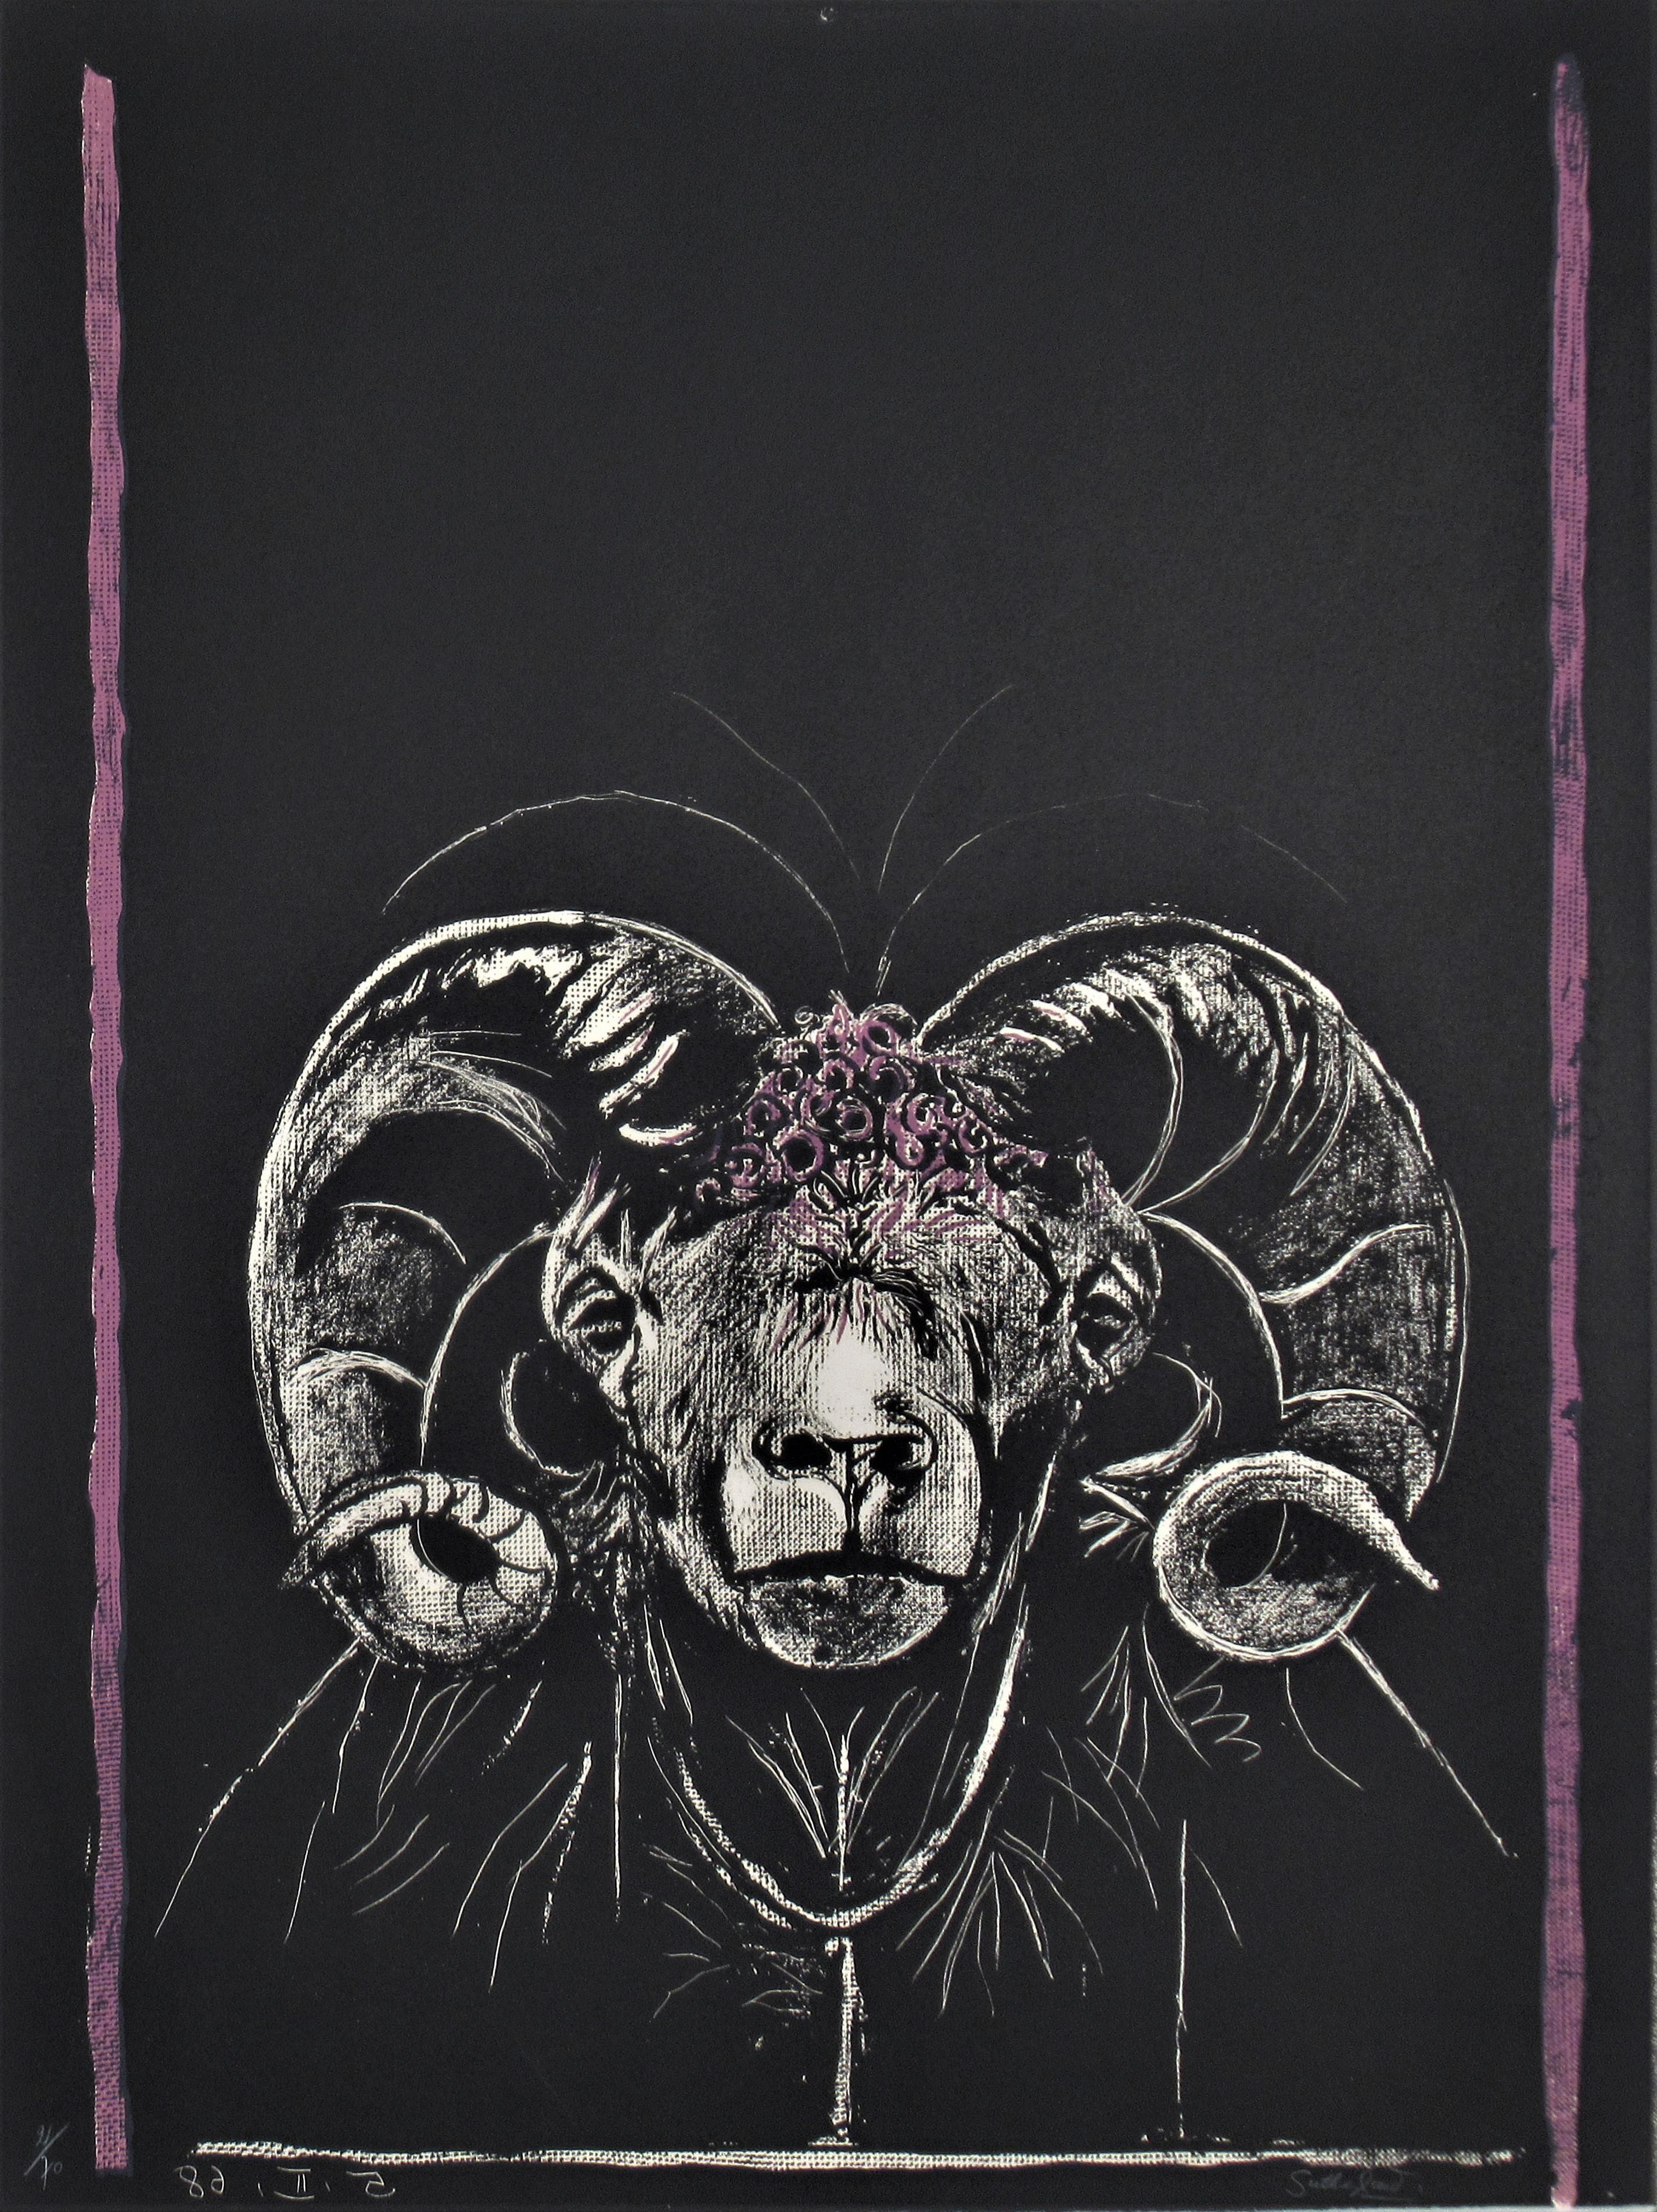 Graham Sutherland Animal Print - "Ram's Head, Full Face" from the suite "Bestiary and some Correspondences" 